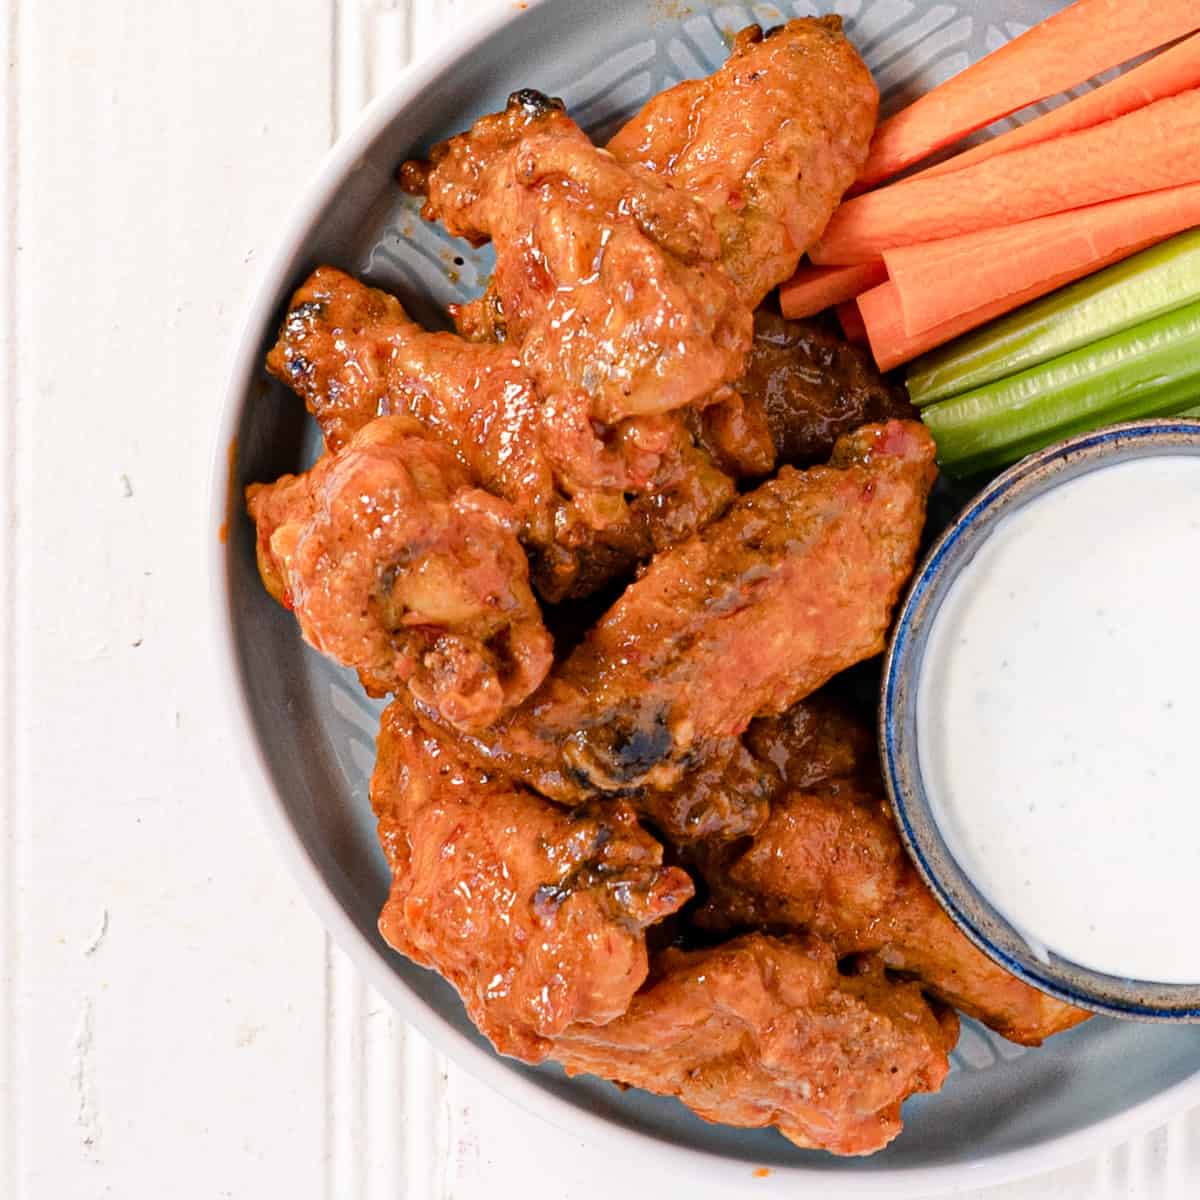 chicken wings on a plate with carrot and celery sticks and blue cheese dip